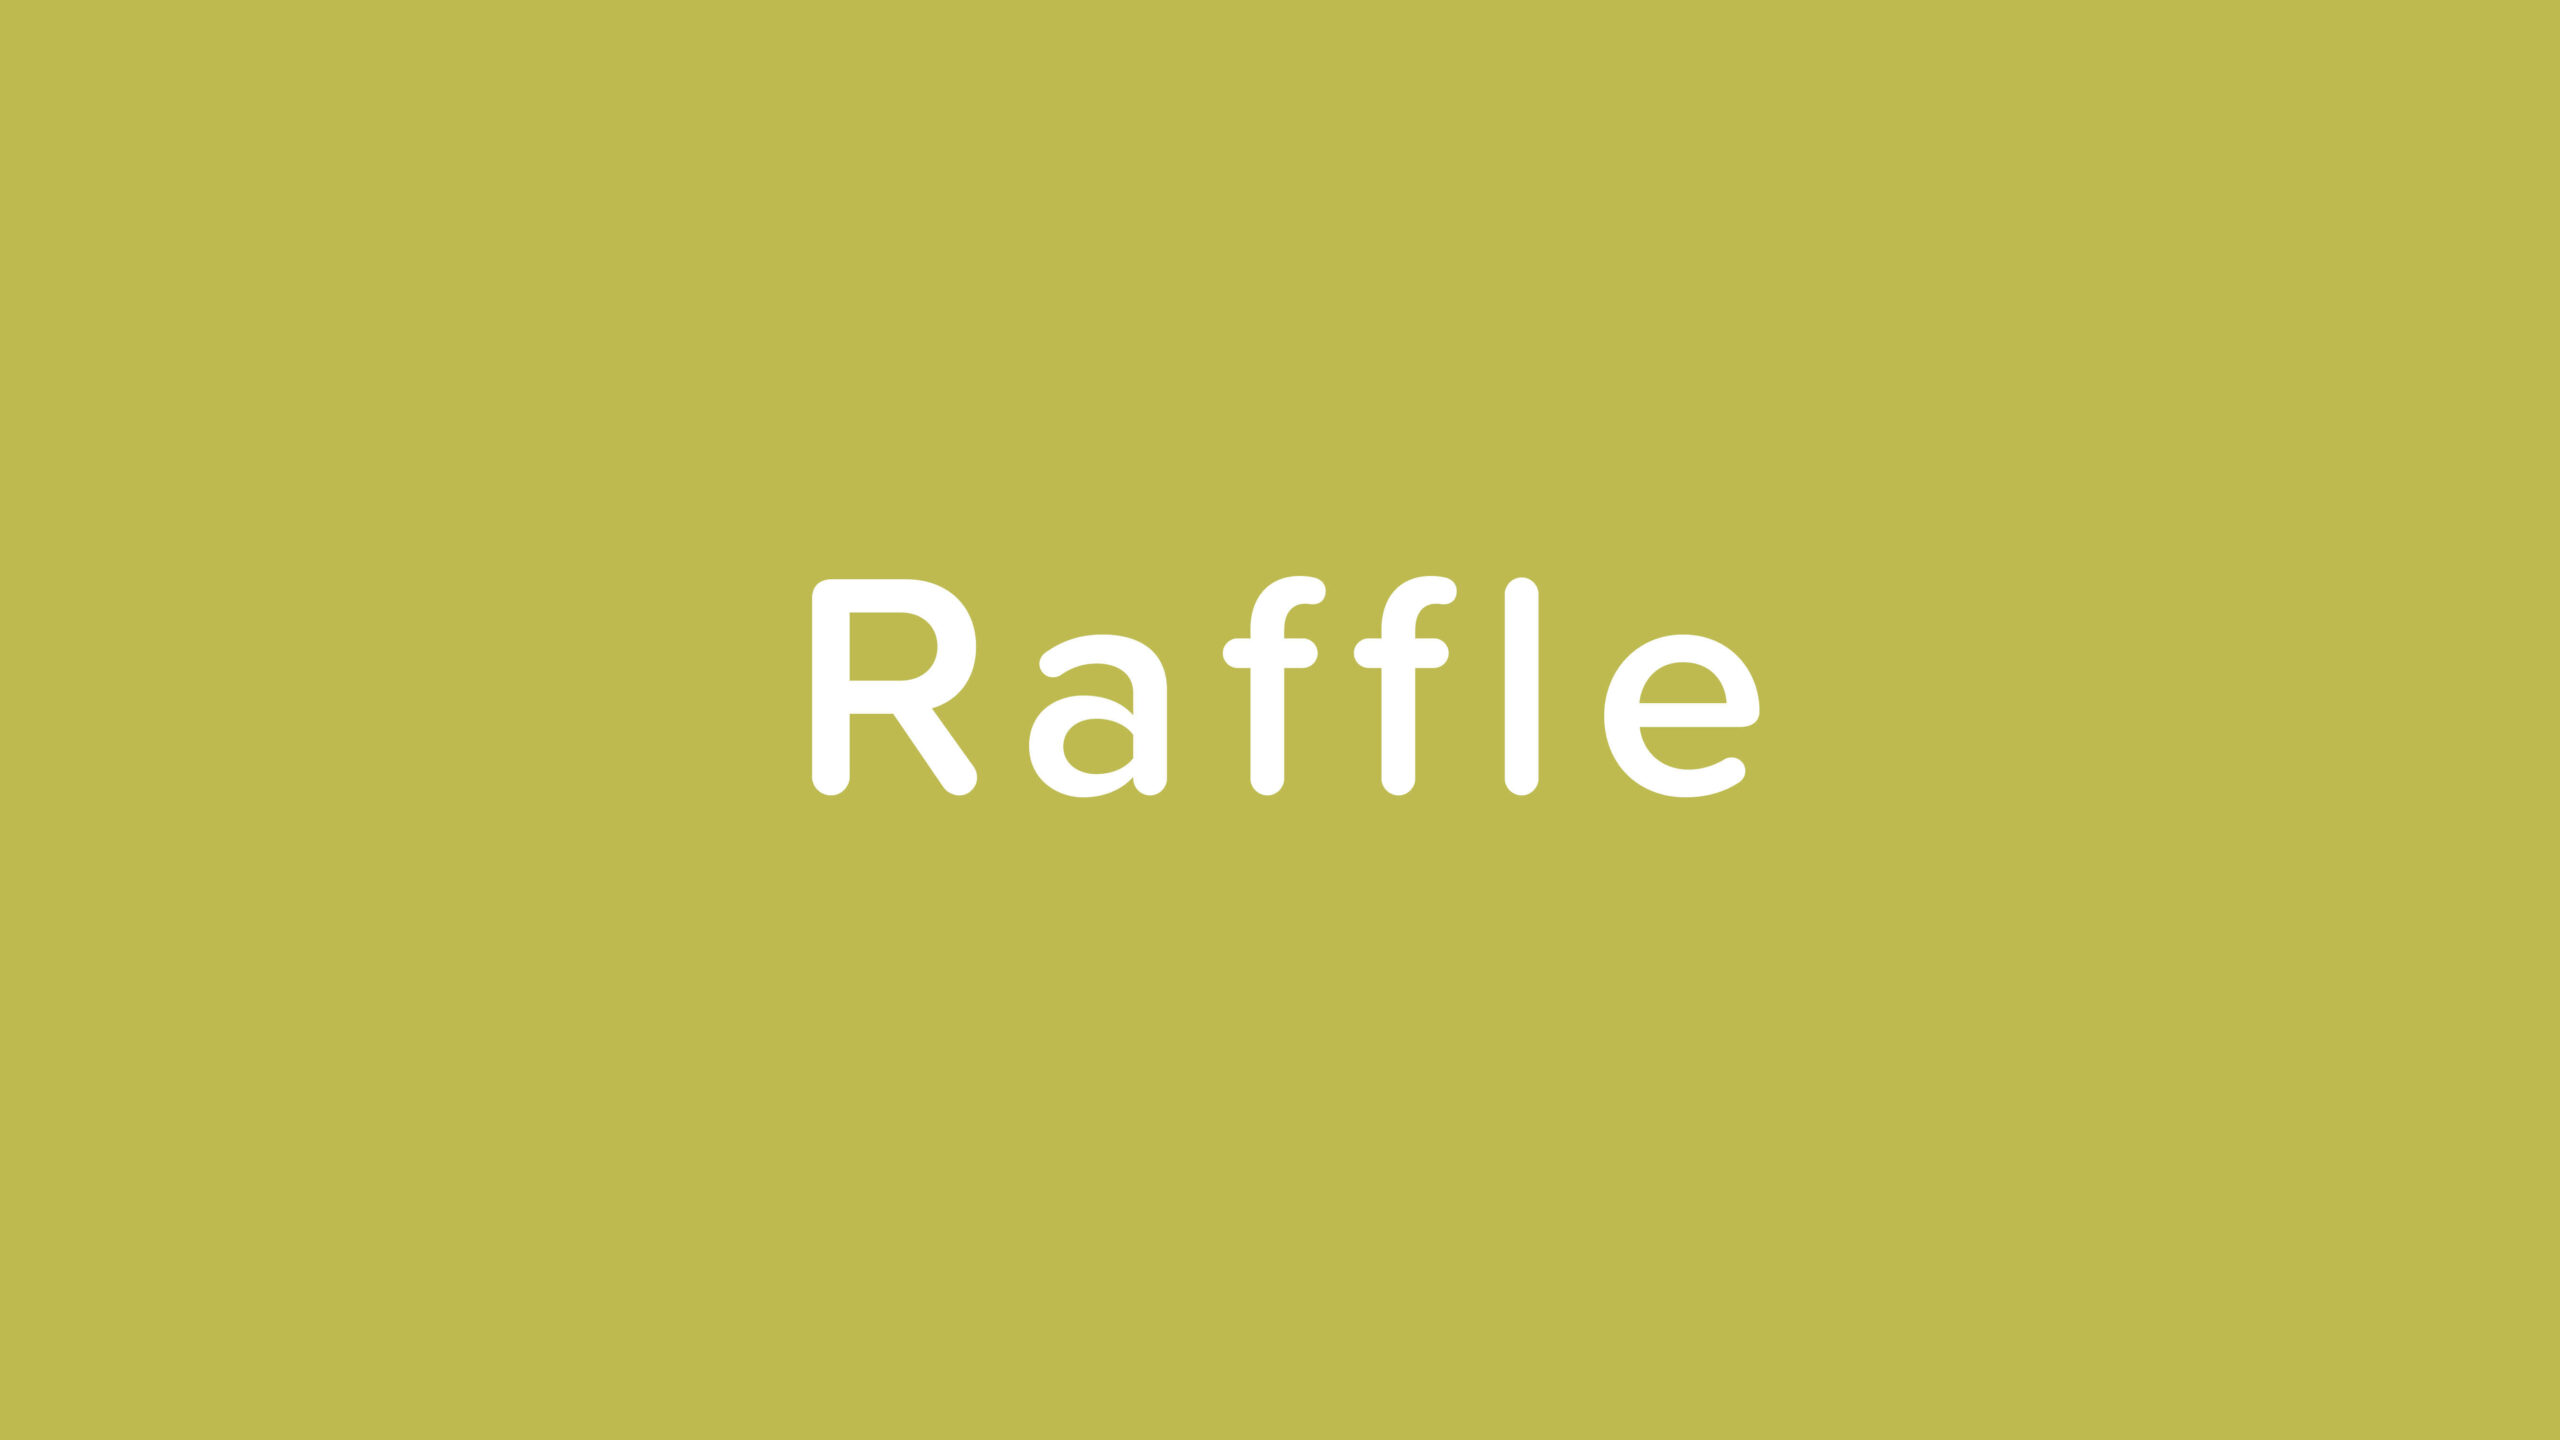 Raffle welcome kit graphic